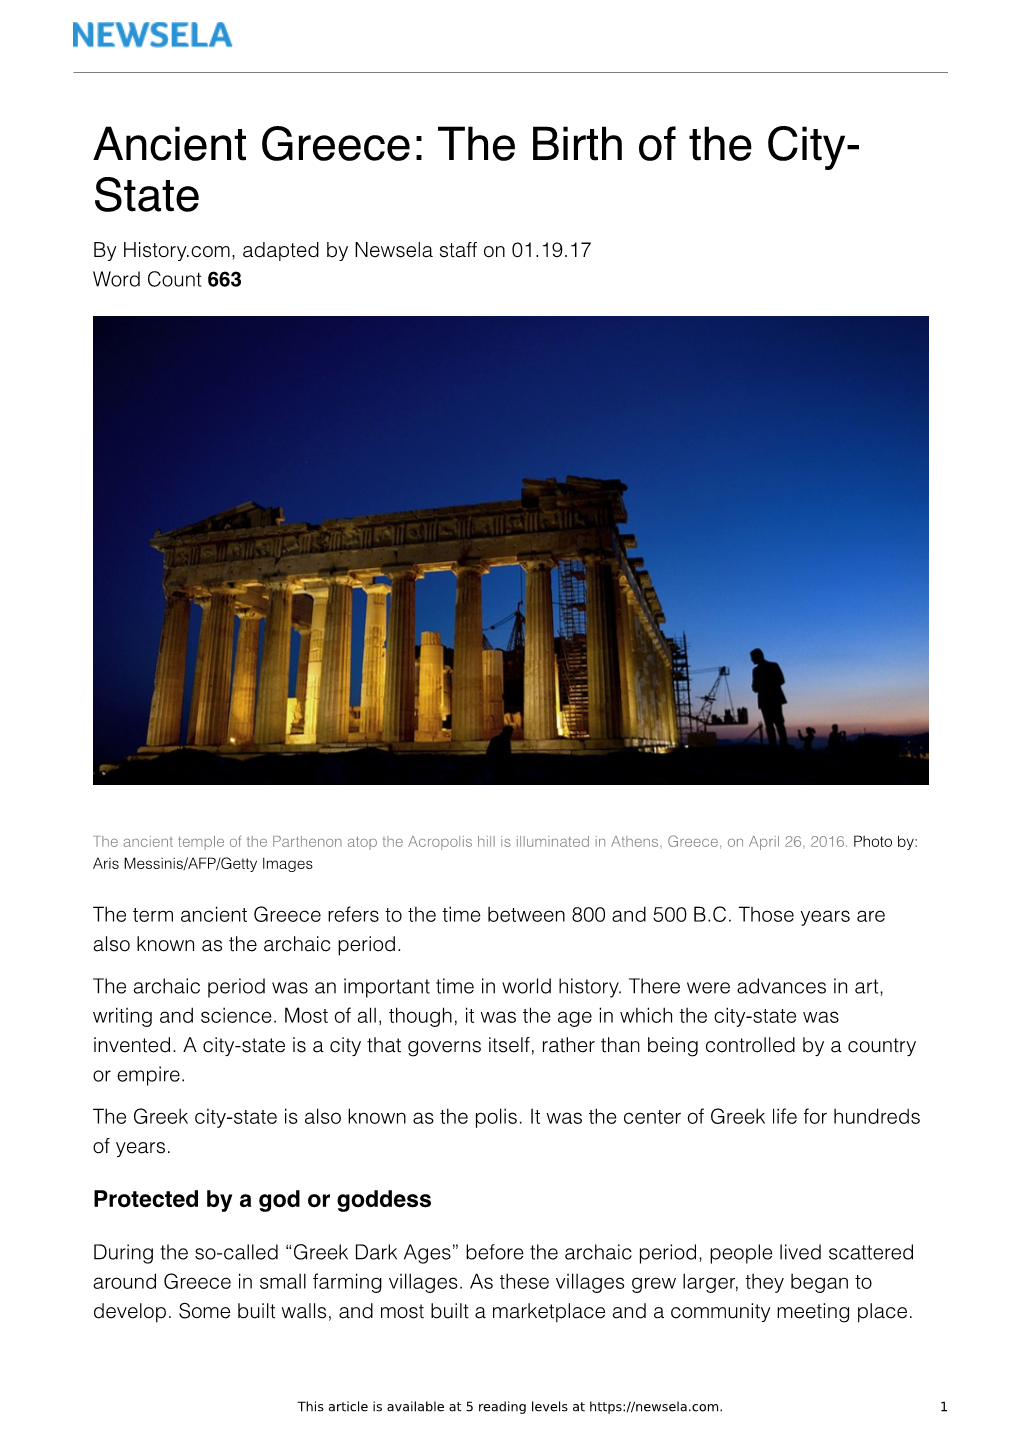 Ancient Greece: the Birth of the City- State by History.Com, Adapted by Newsela Staff on 01.19.17 Word Count 663